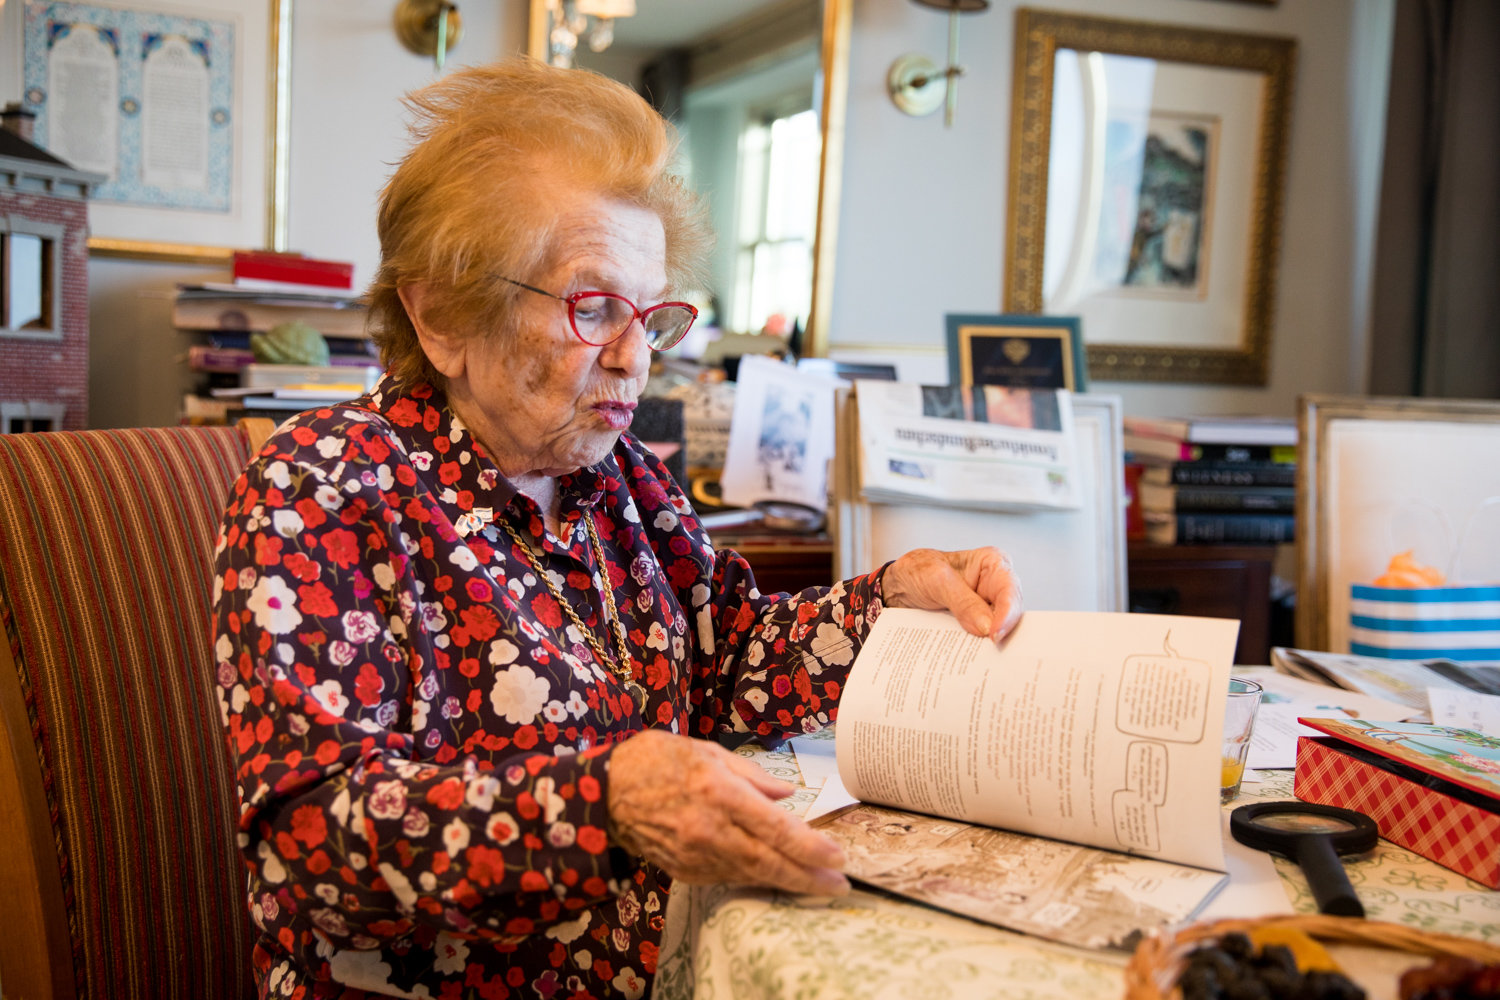 Dr. Ruth K. Westheimer flips through a graphic novel about her life’s story, ‘Roller Coaster Grandma: The Amazing Story of Dr. Ruth.’